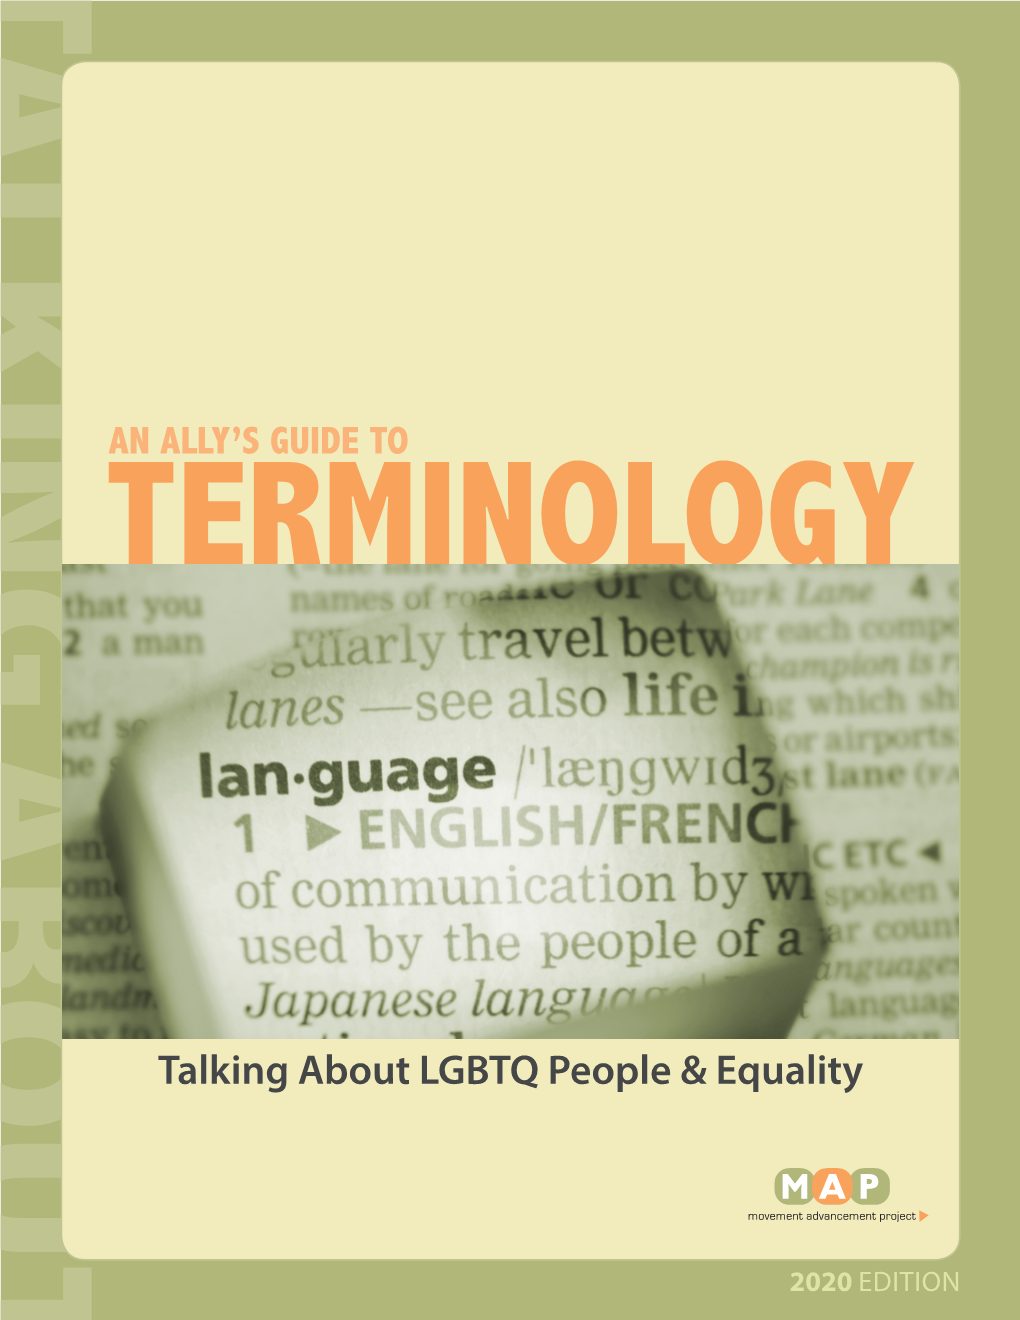 An Ally's Guide to Terminology